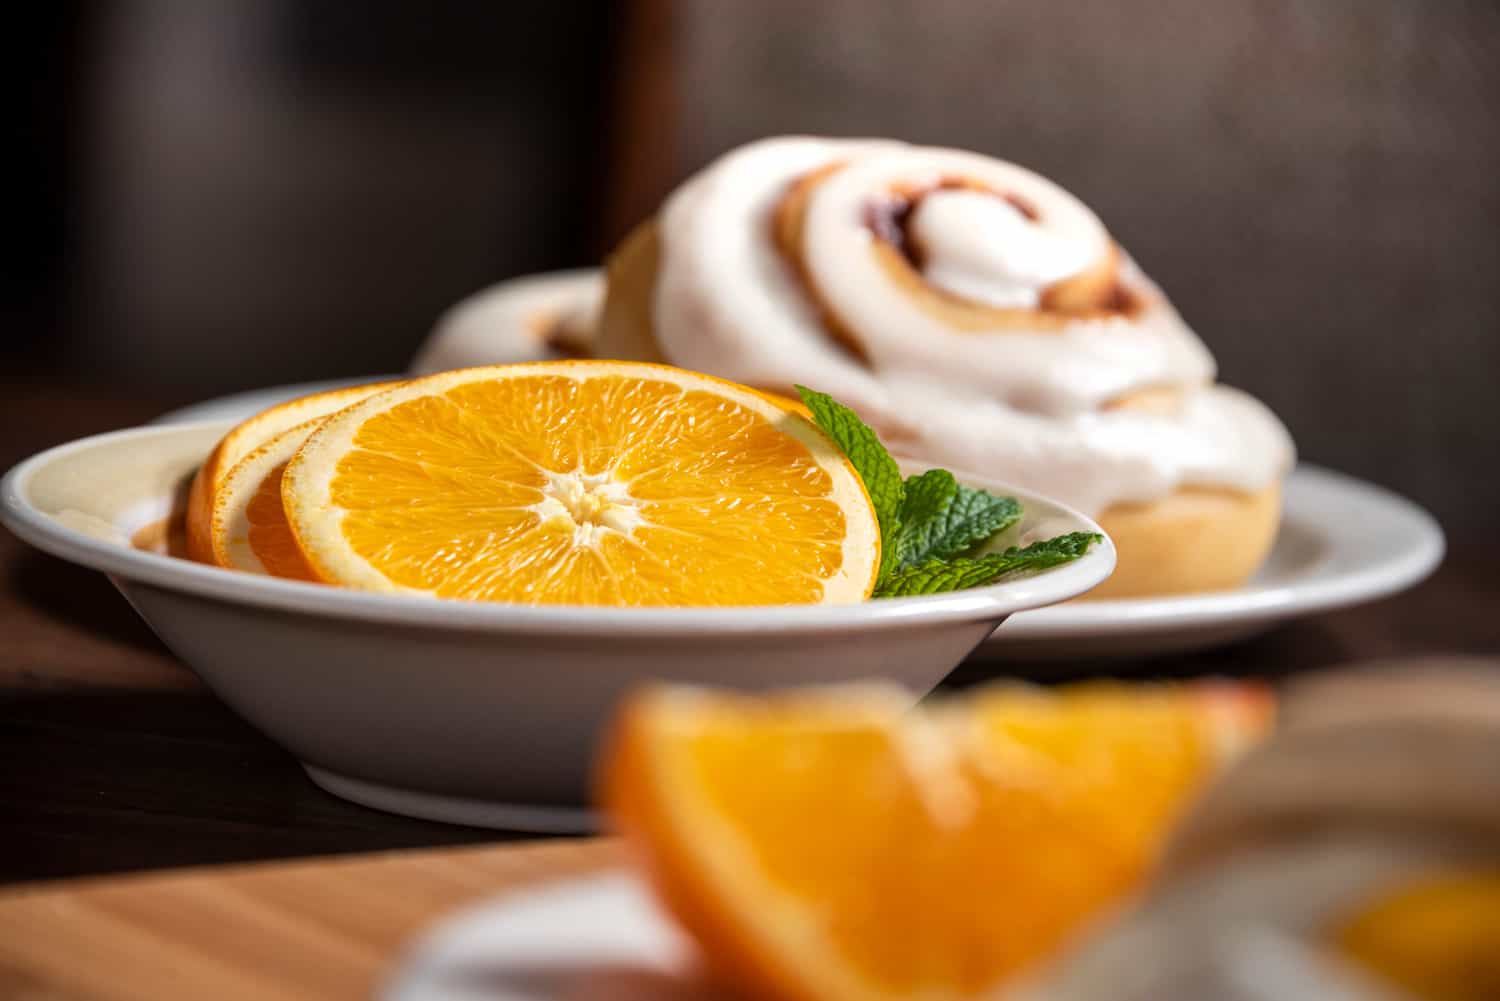 Small bowl of orange slices with a mint garnish sitting on wooden table. Focus is on the orange slices. There is a large cinnamon roll and an orange wedge in the background and foreground out of focus.